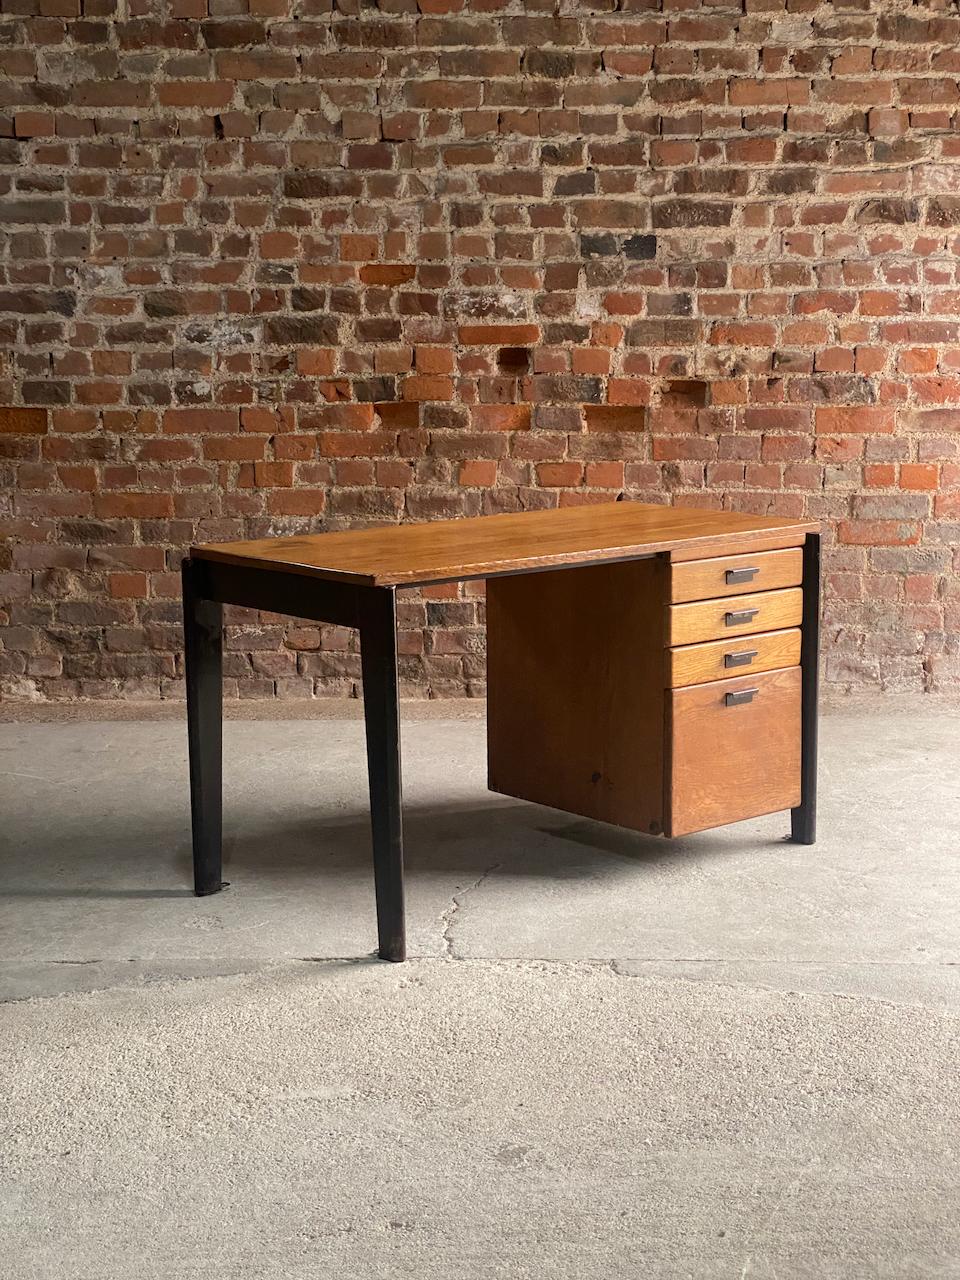 Jean Prouvé Dactylo desk No. BD 41 Circa 1948 

Rare and important mid century Ateliers Jean Prouvé black Dactylo Steel & Oak Desk No. BD 41 circa 1948, commissioned by Atelier Jean Prouve Ferembal later changed to Massilly, the desk with